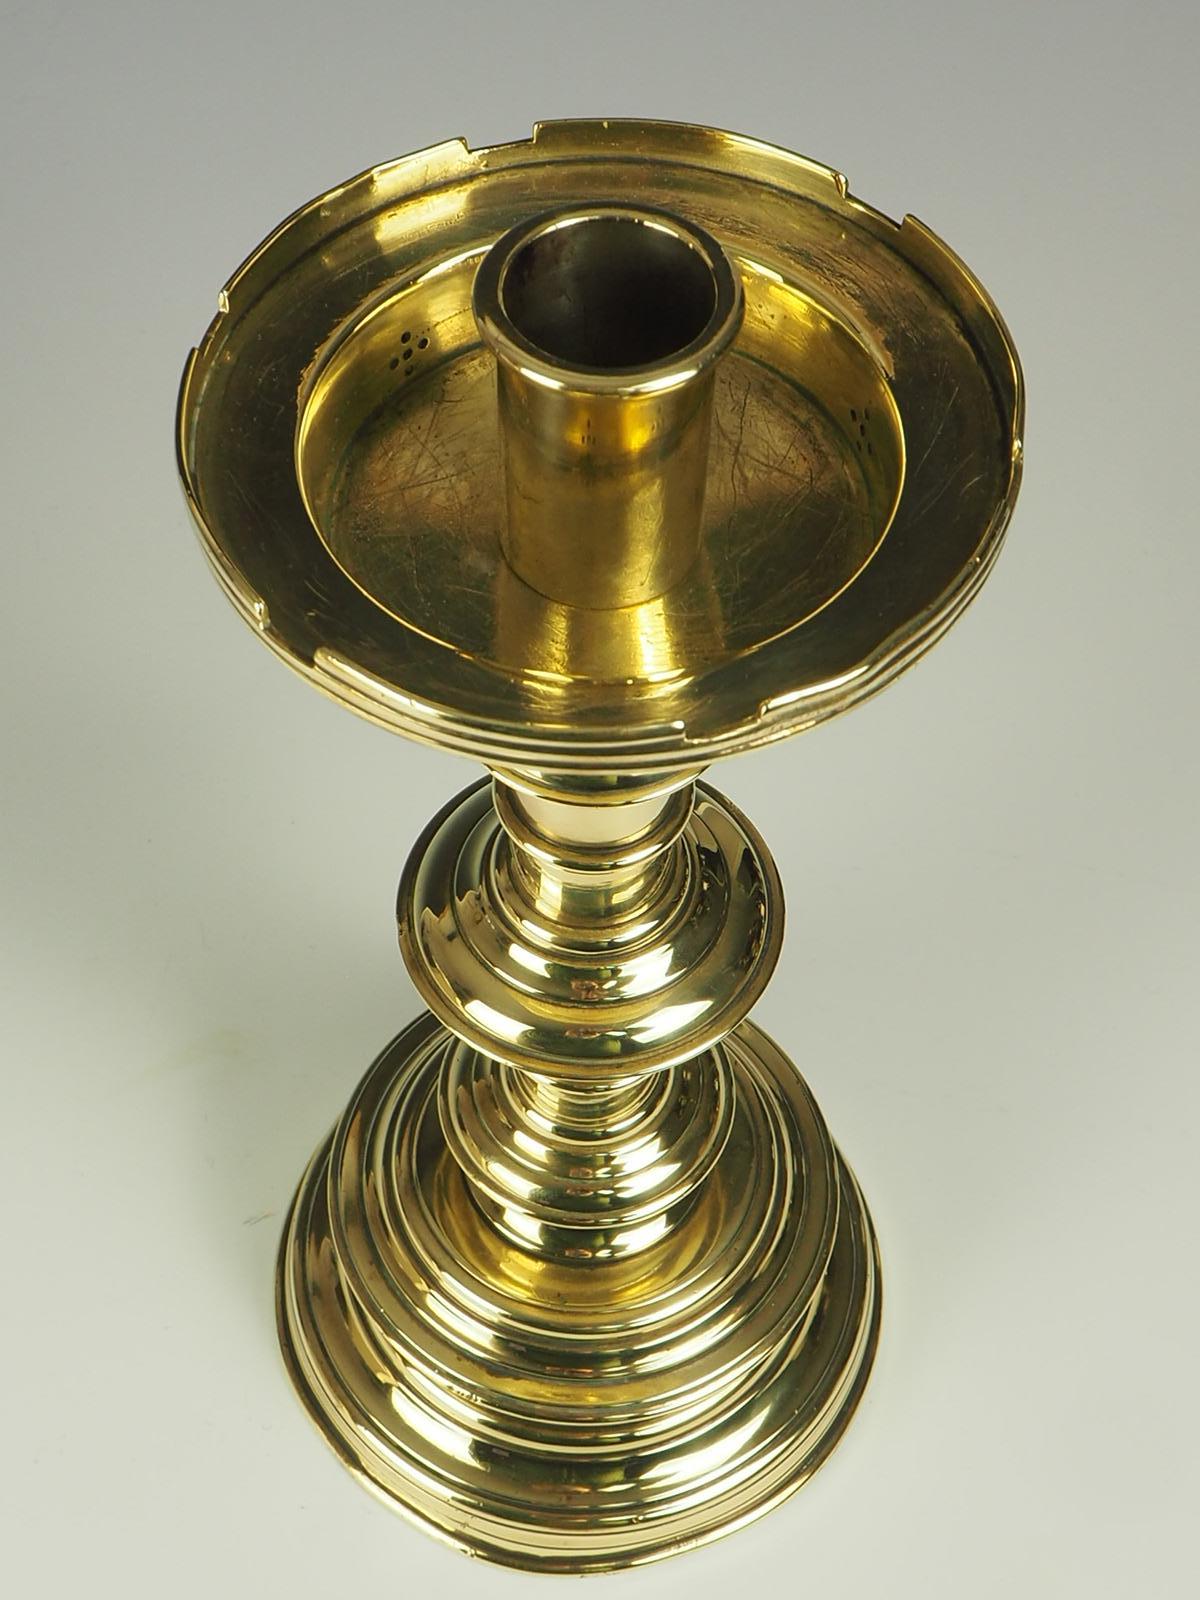 English 19th Century Pierced Brass Castellated Candle Holder For Sale 4